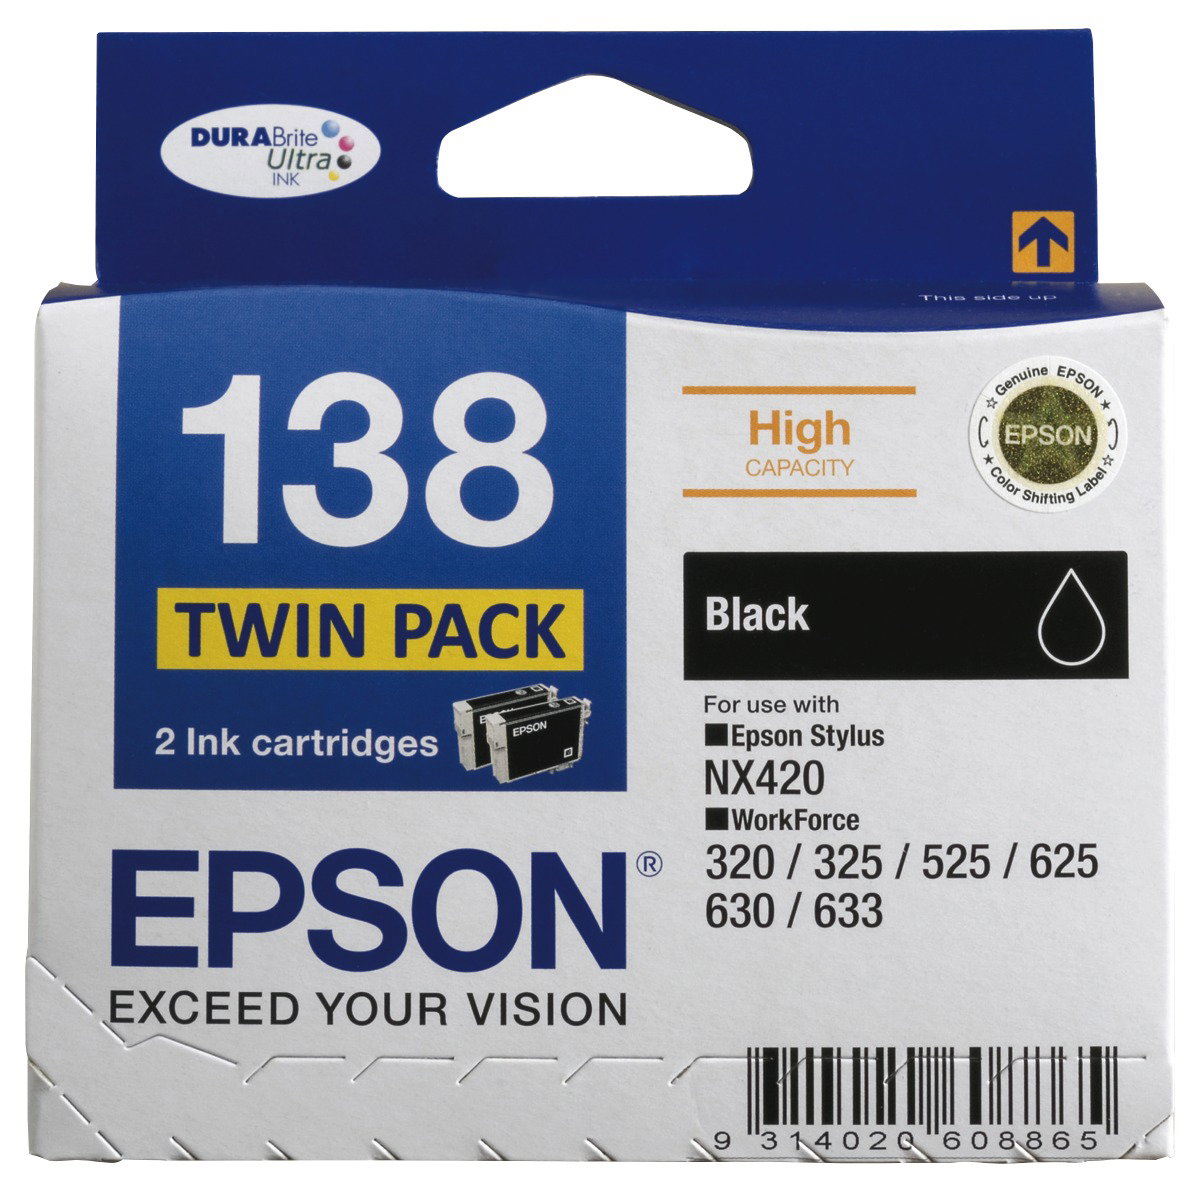 Epson 138 Black High Yield Ink Cartridge Twin Pack Elive Nz 6657